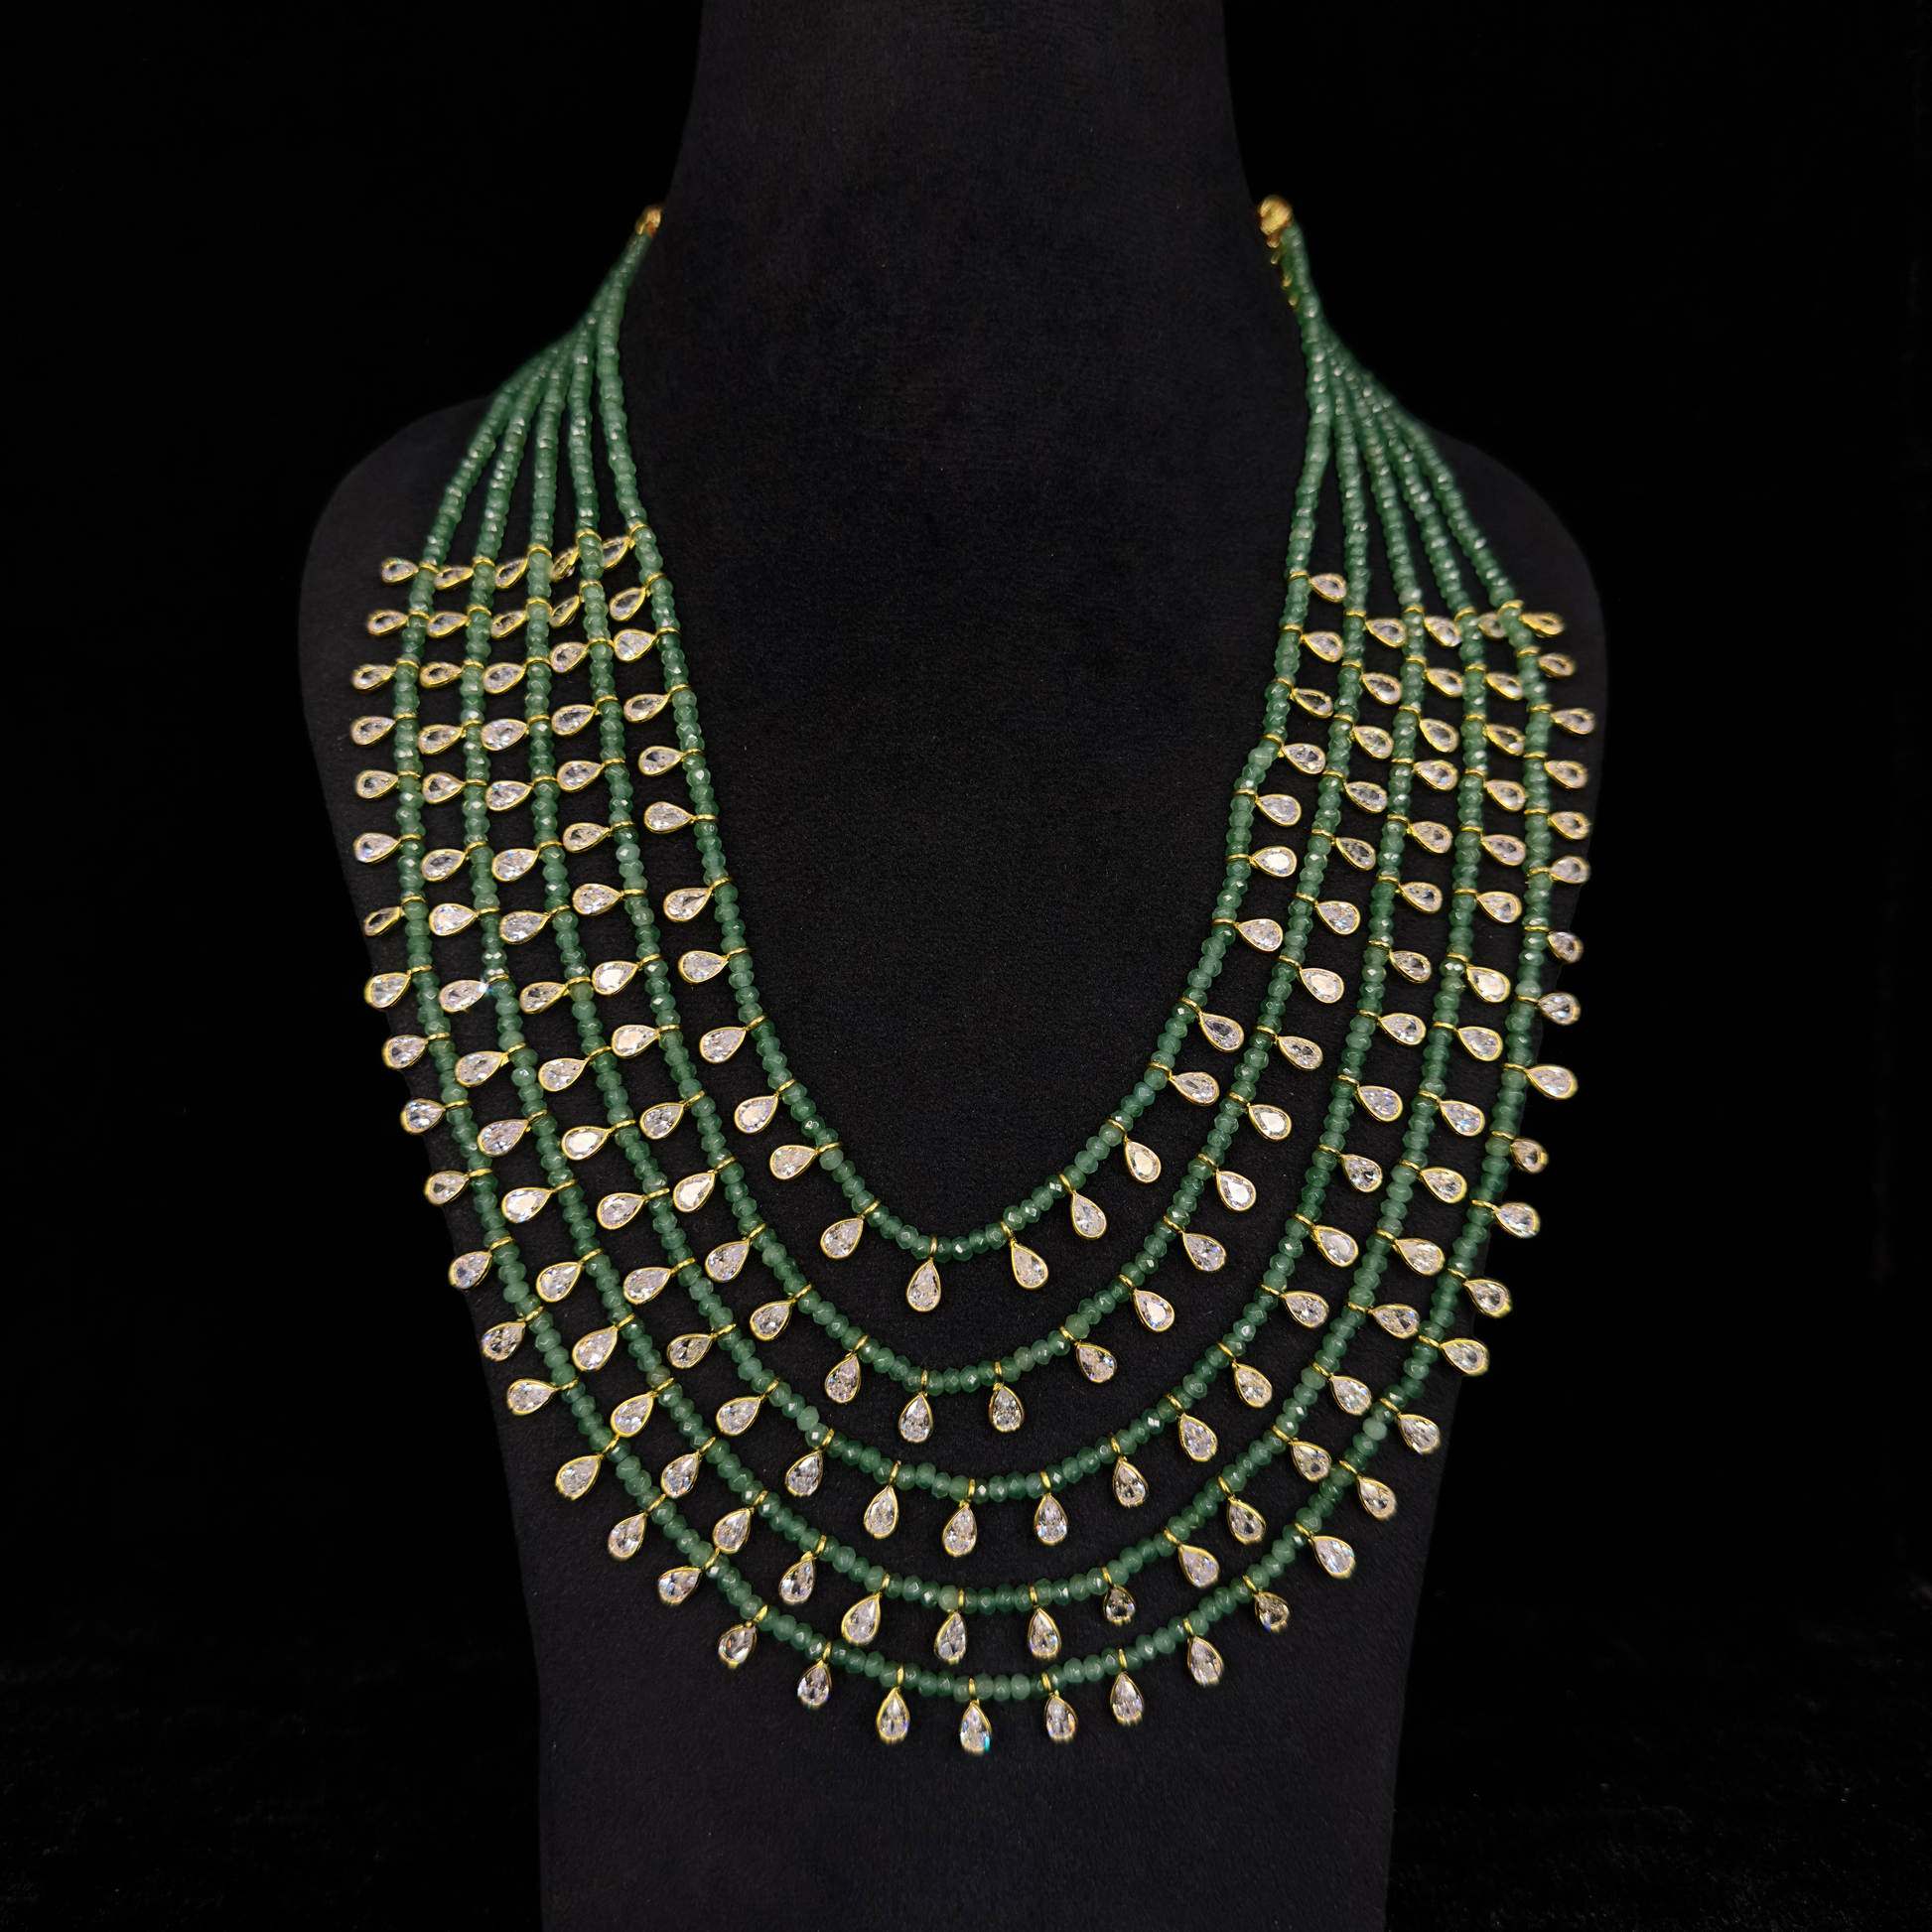 Victorian five-Layer Necklace for Men & Women. This beads jewellery is available in Light green, dark green, red, & blue colour variants.